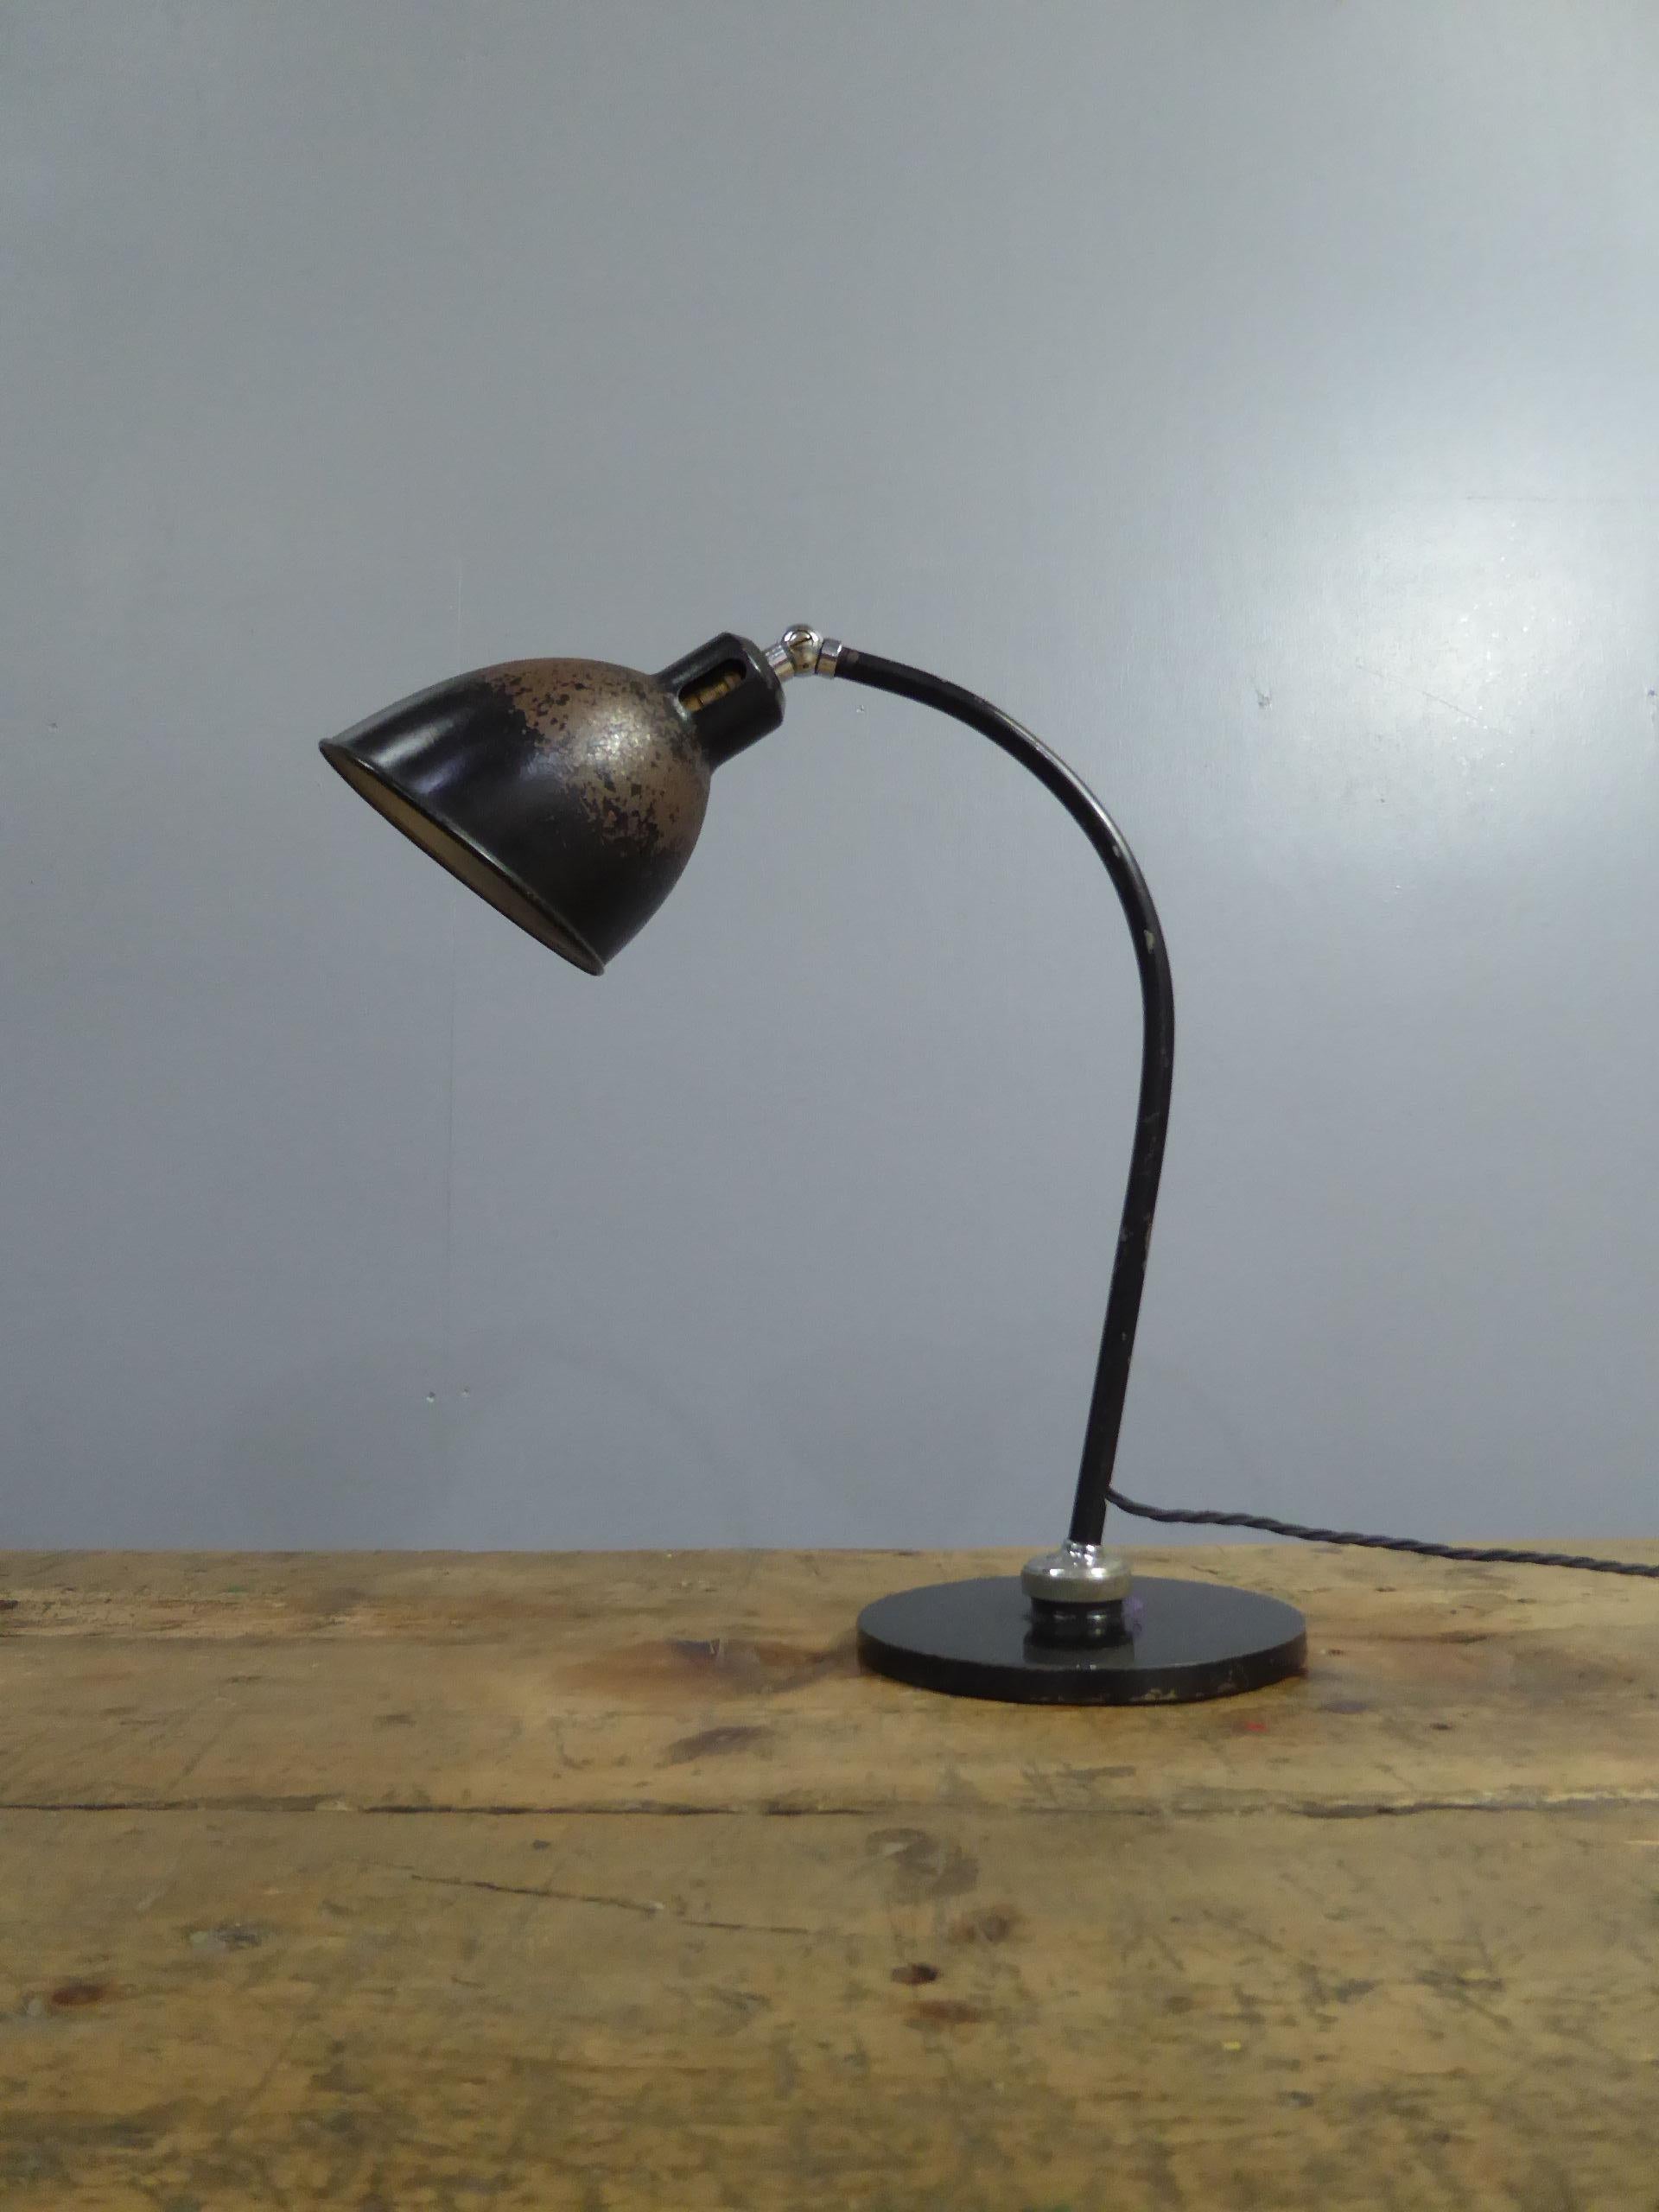 A rare early vintage Bauhaus table lamp by Christian Dell for Bunte & Remmler.
The 'Polo Popular', a wonderful & exceptionally original example of this rare German classic with a spun steel shade, adjustable chrome ball jointed arm & a cast iron